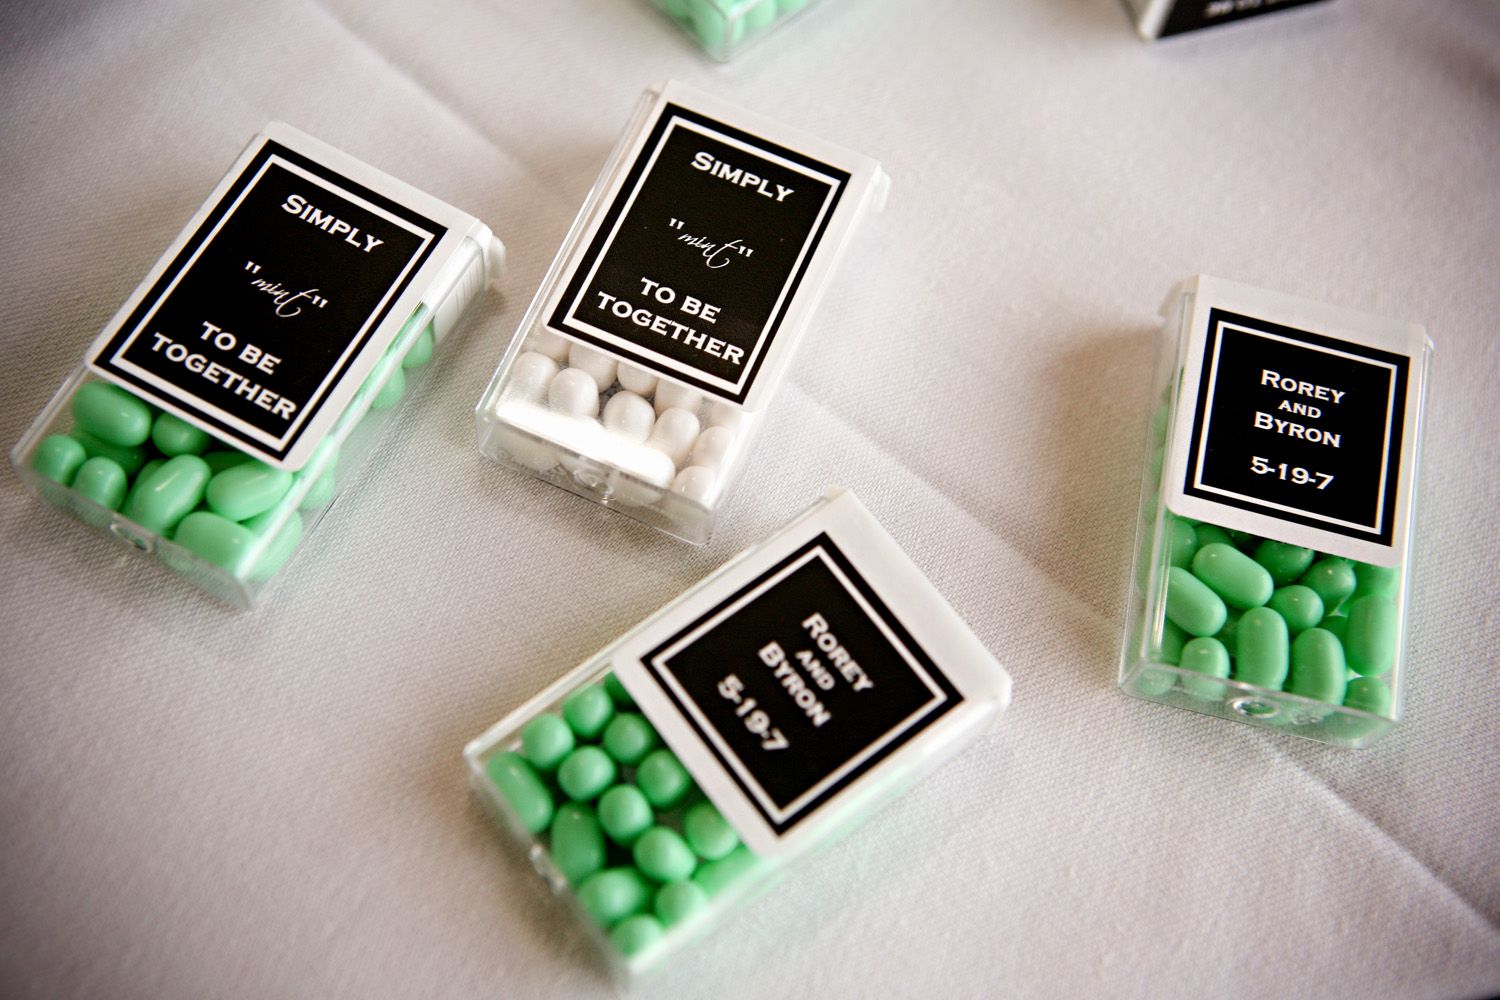 Wedding Shower Favors, Cute Favors For Any Theme -   Best Favors Ideas